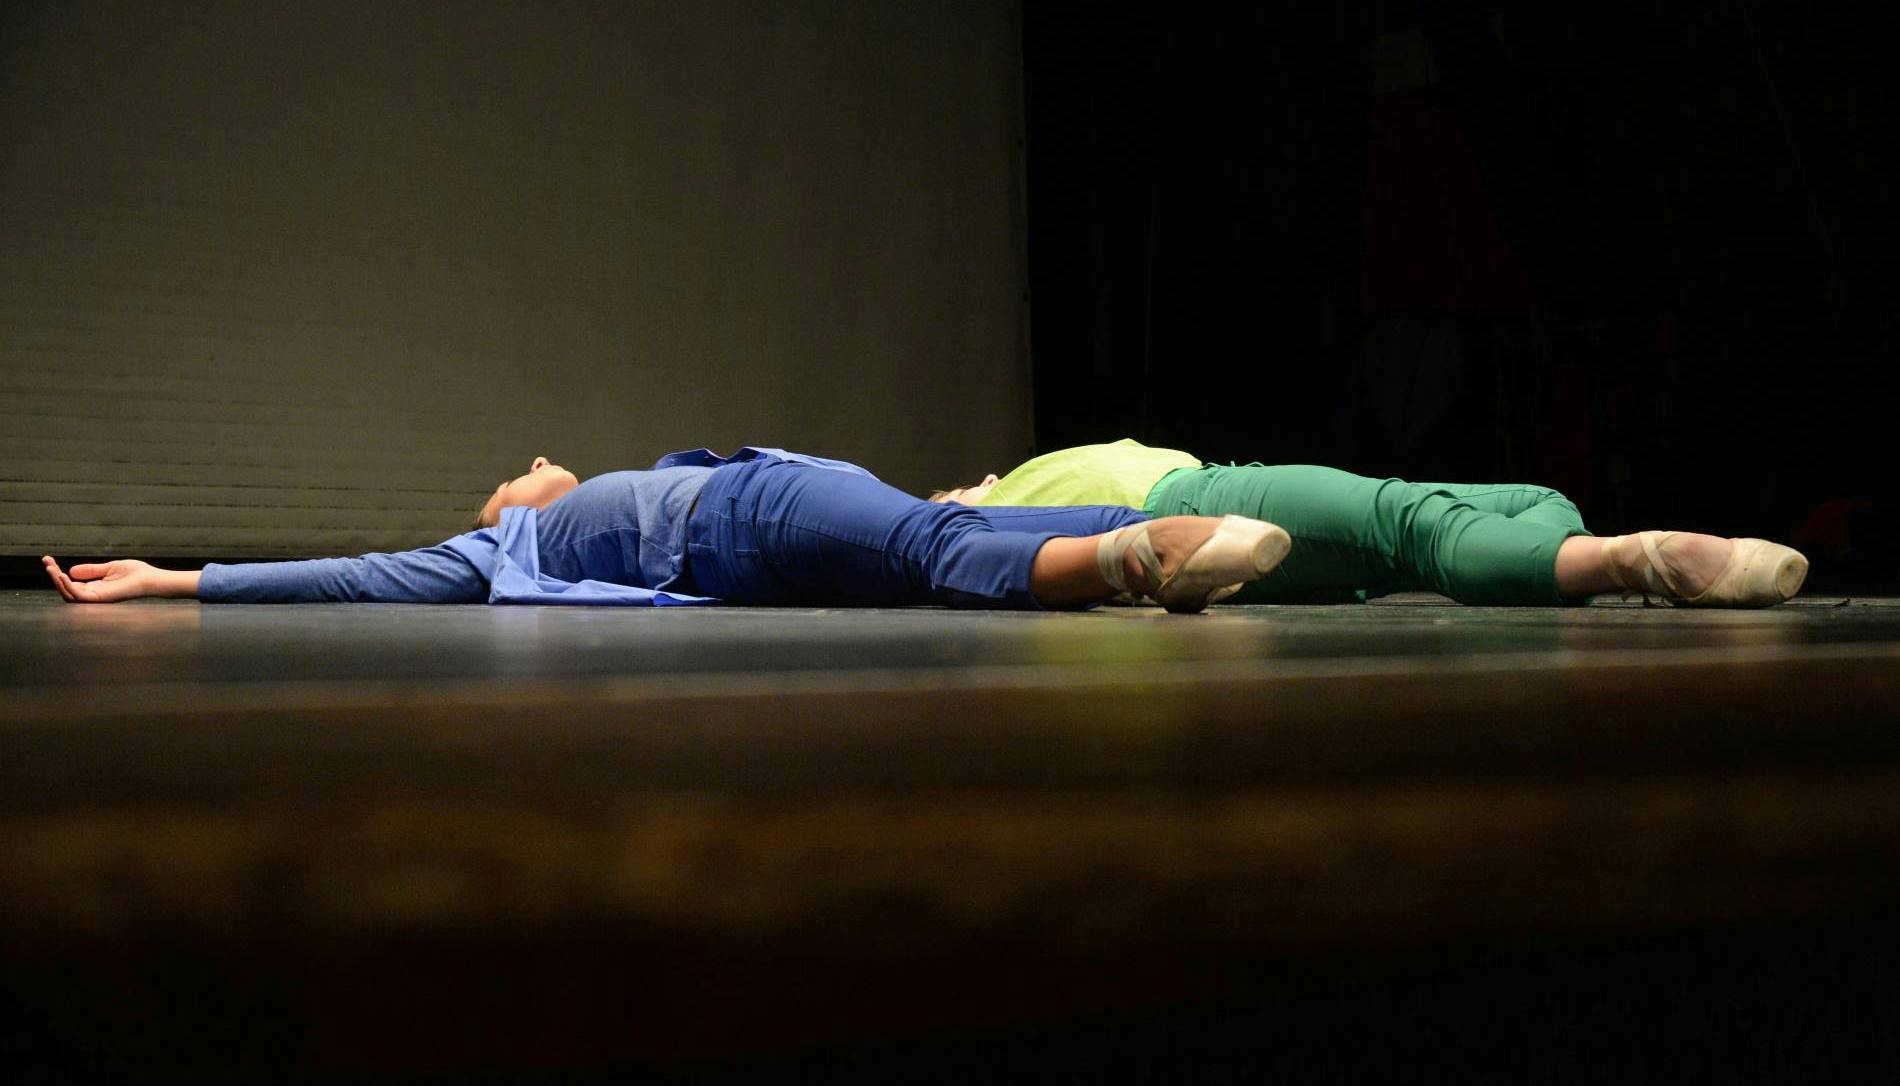 Two dancers are lying on the ground on a stage, parallel to each other. One is dressed in blue, the other one in green. On their feet, facing the audience, they wear pointe shoes.